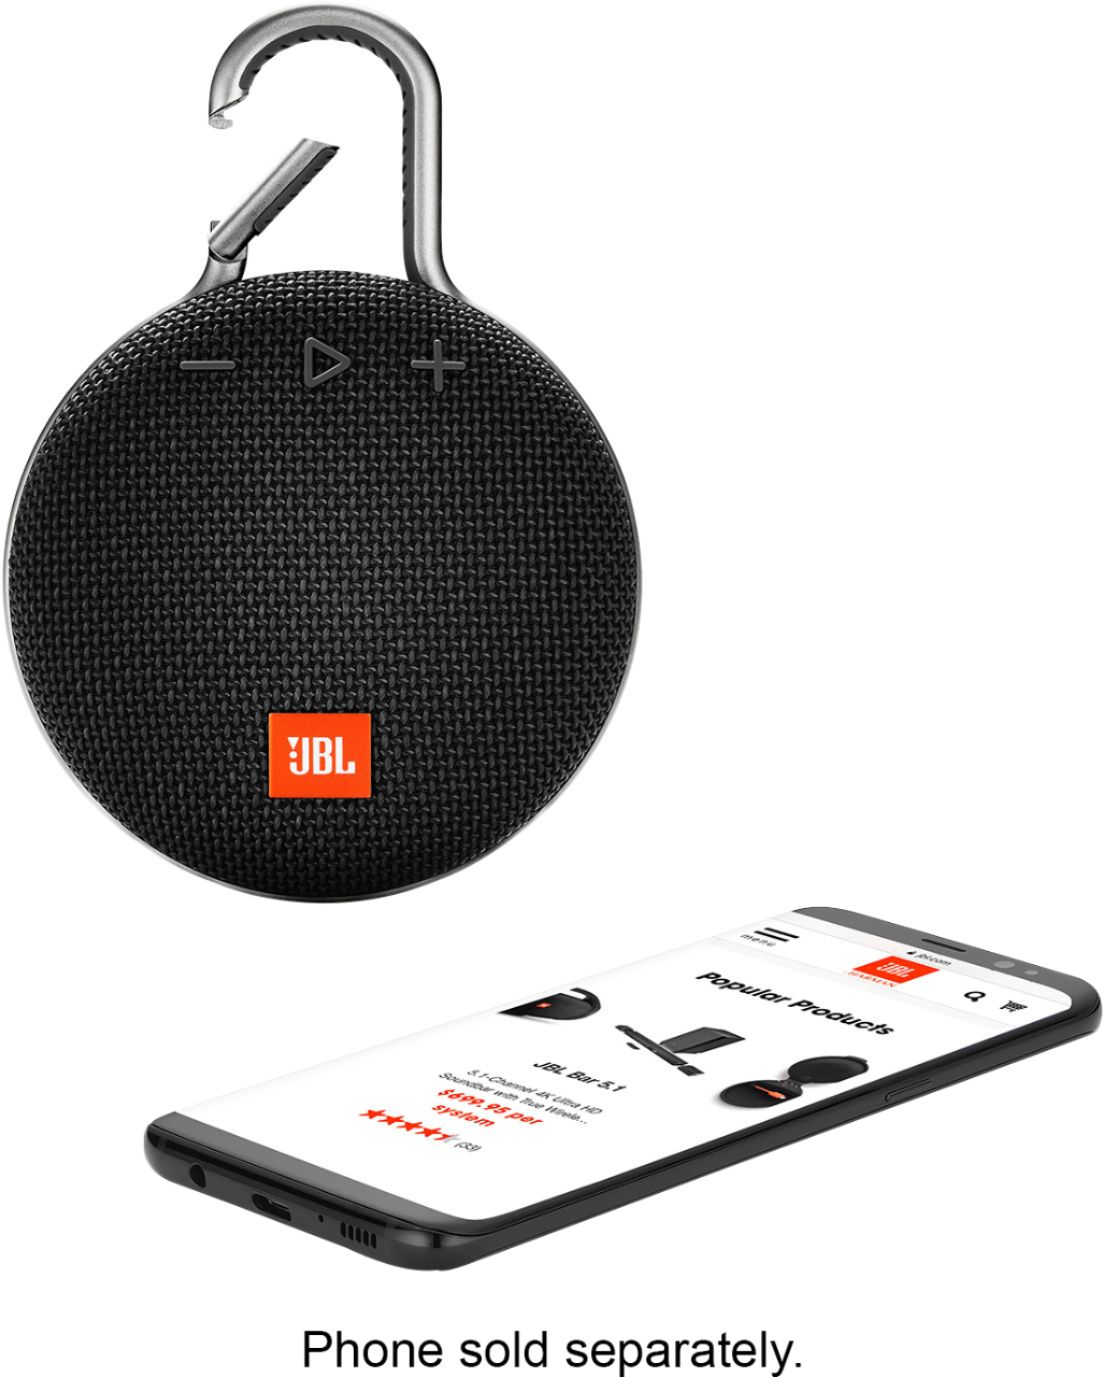 JBL Clip (Black) review: A tiny Bluetooth speaker that sounds good for its  size and travels well - CNET